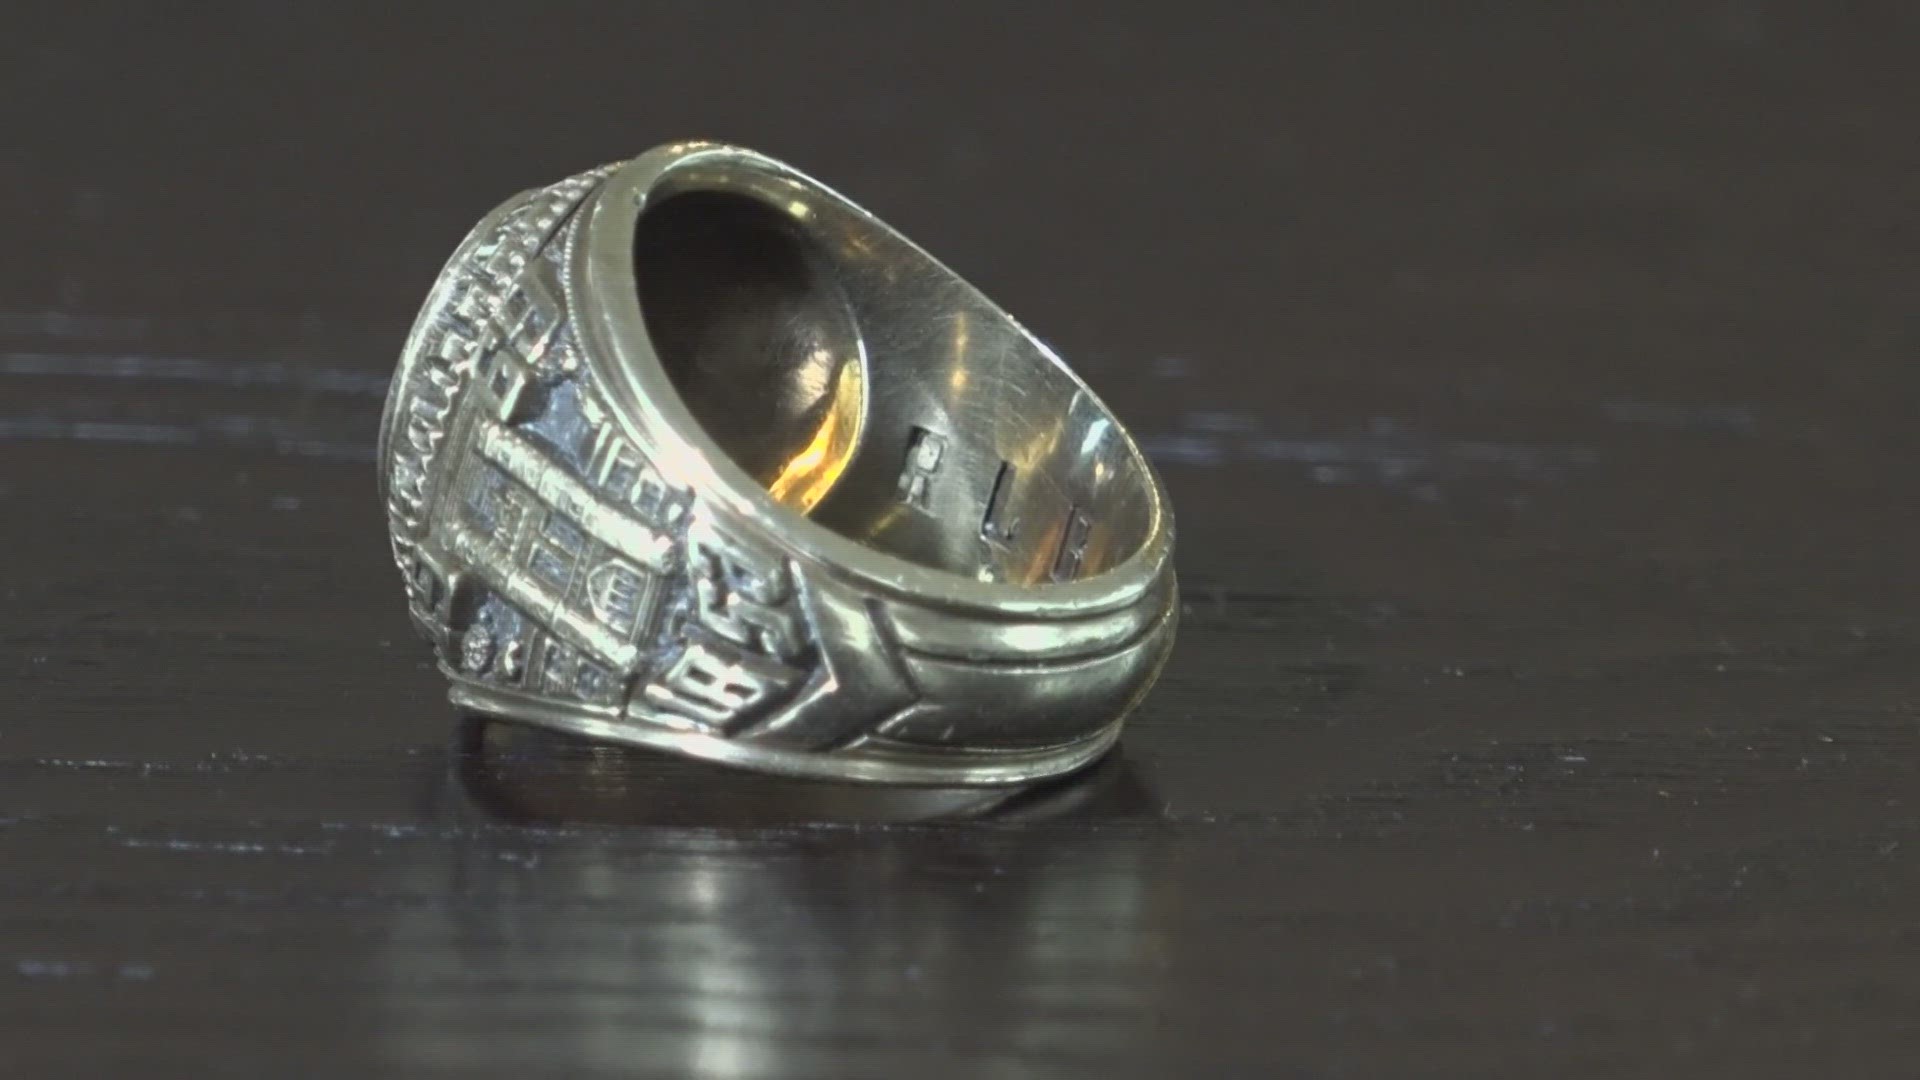 Robert Brown lost his Washington University class ring in 1969. Mindy Berry, who found the ring, is returning it with the help of the school archive.